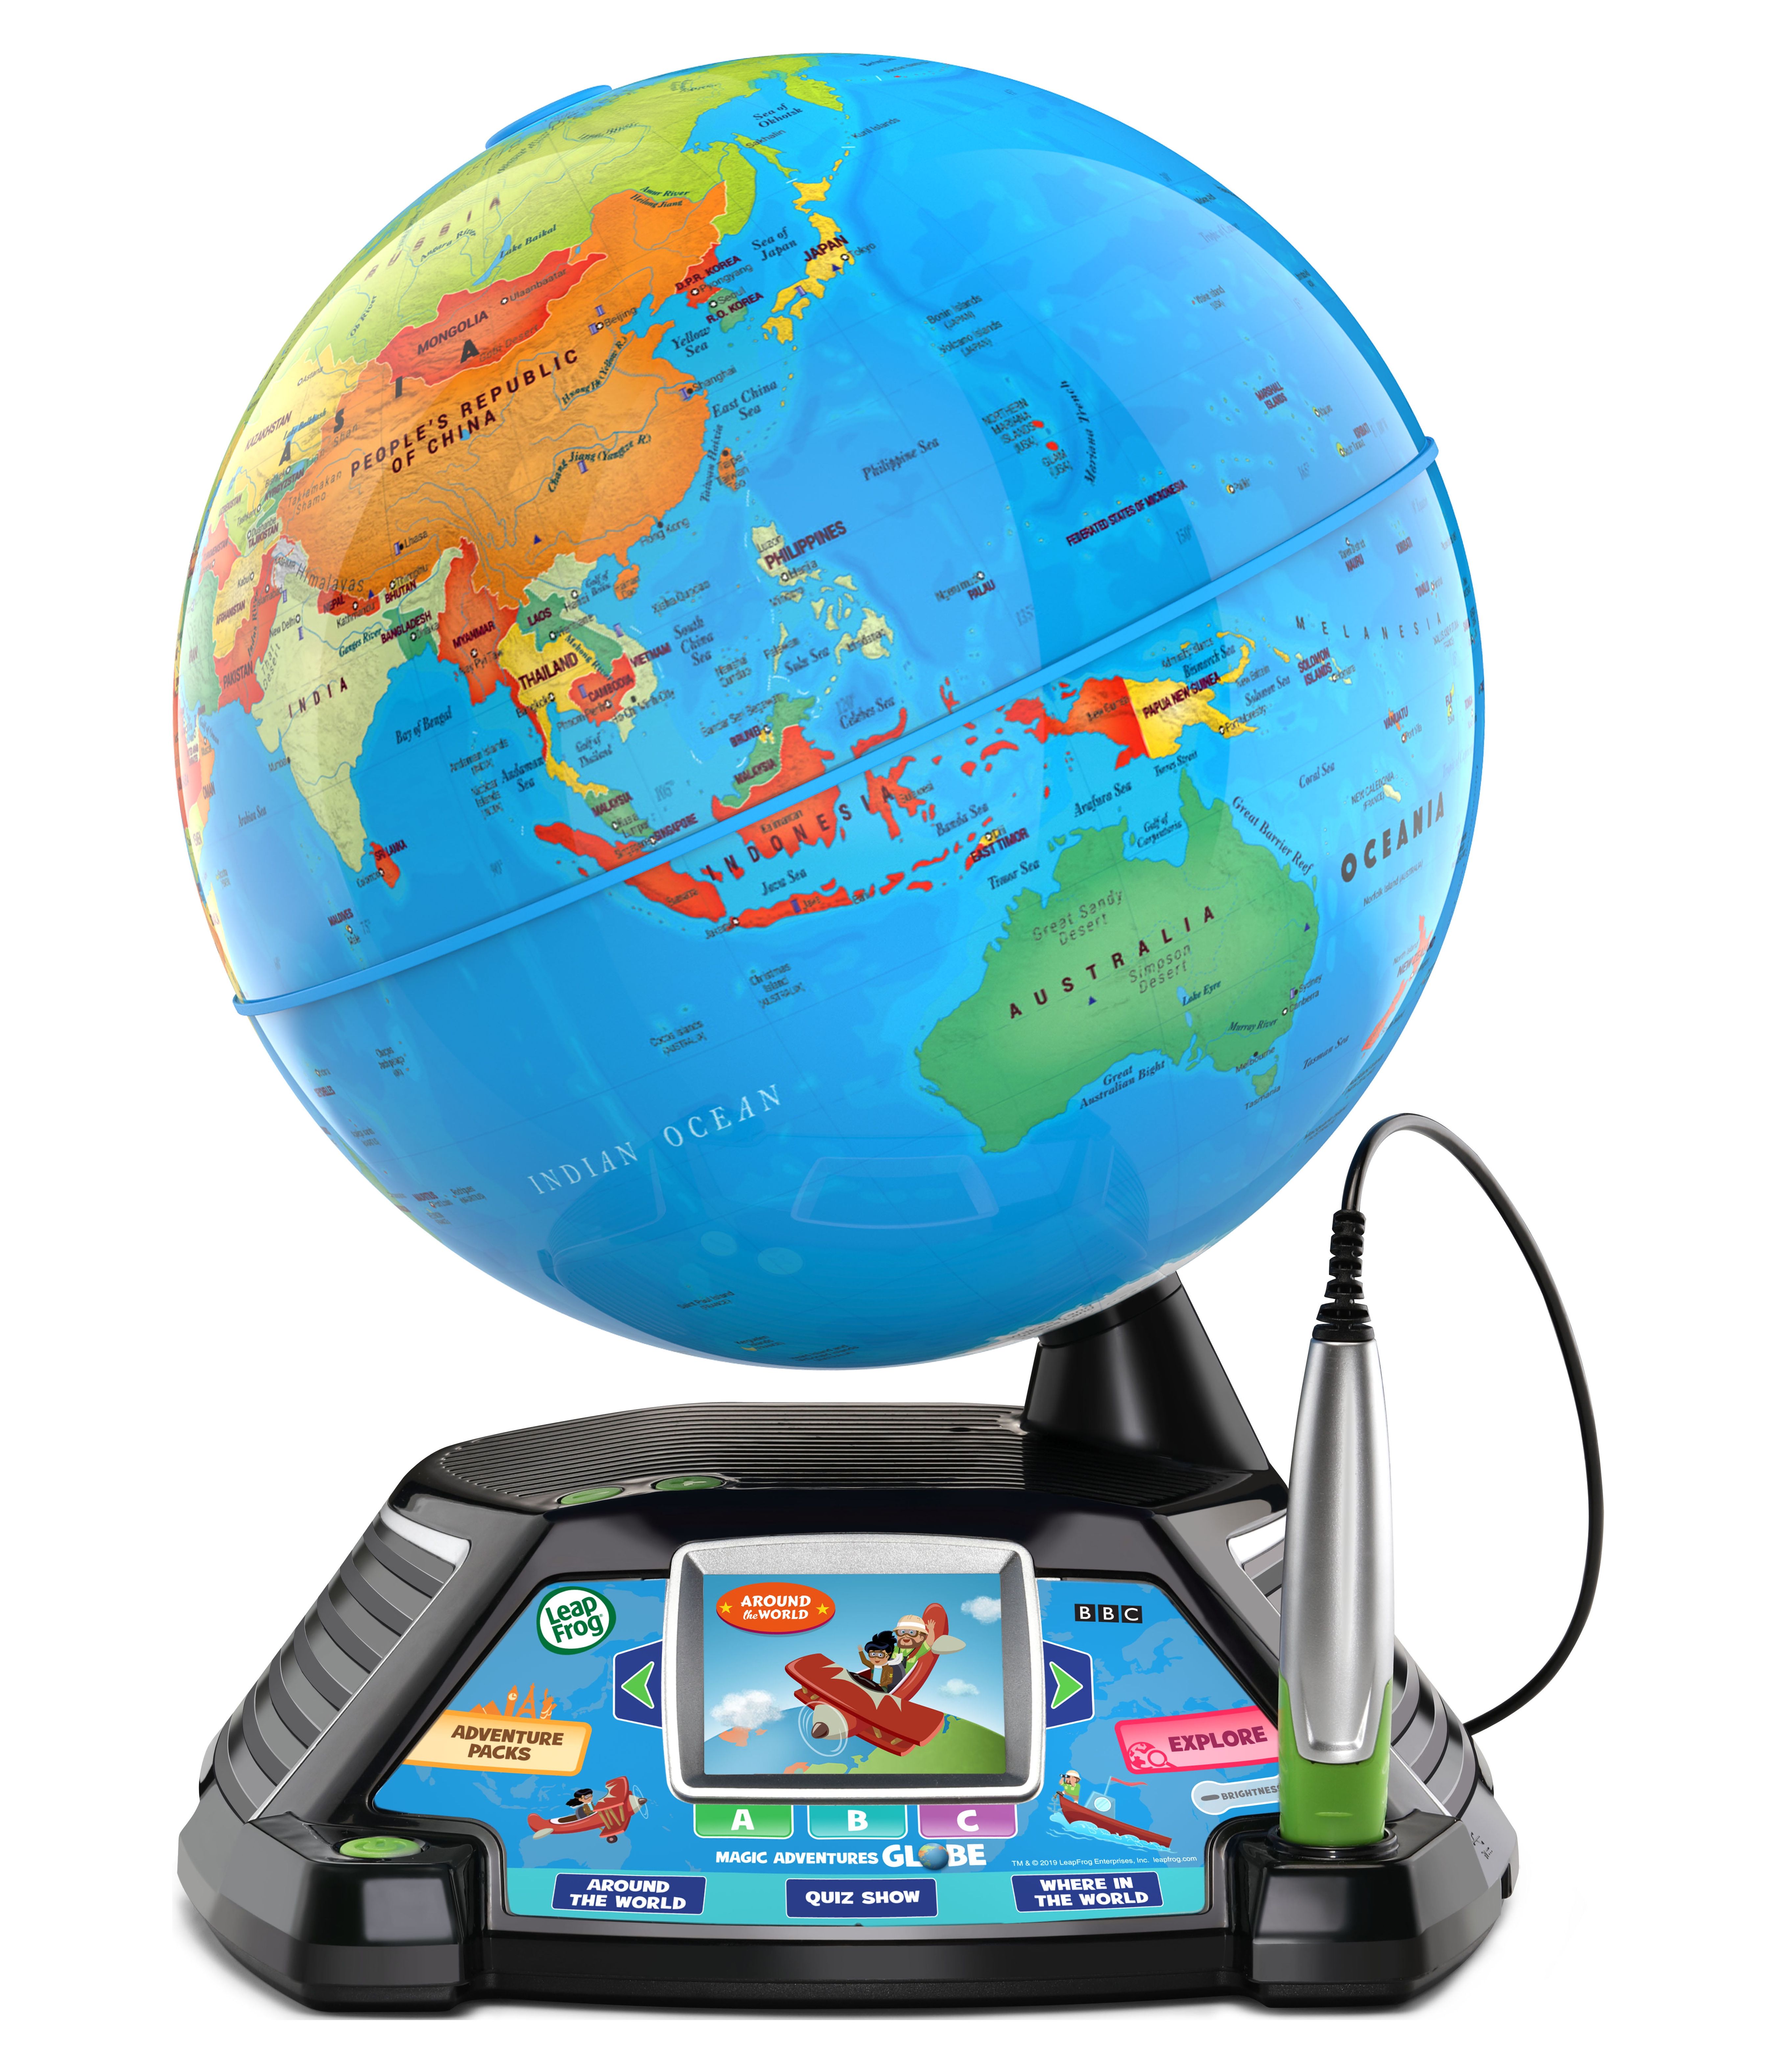 LeapFrog Magic Adventures Interactive Globe With 5+ Hours of BBC Video - image 1 of 5